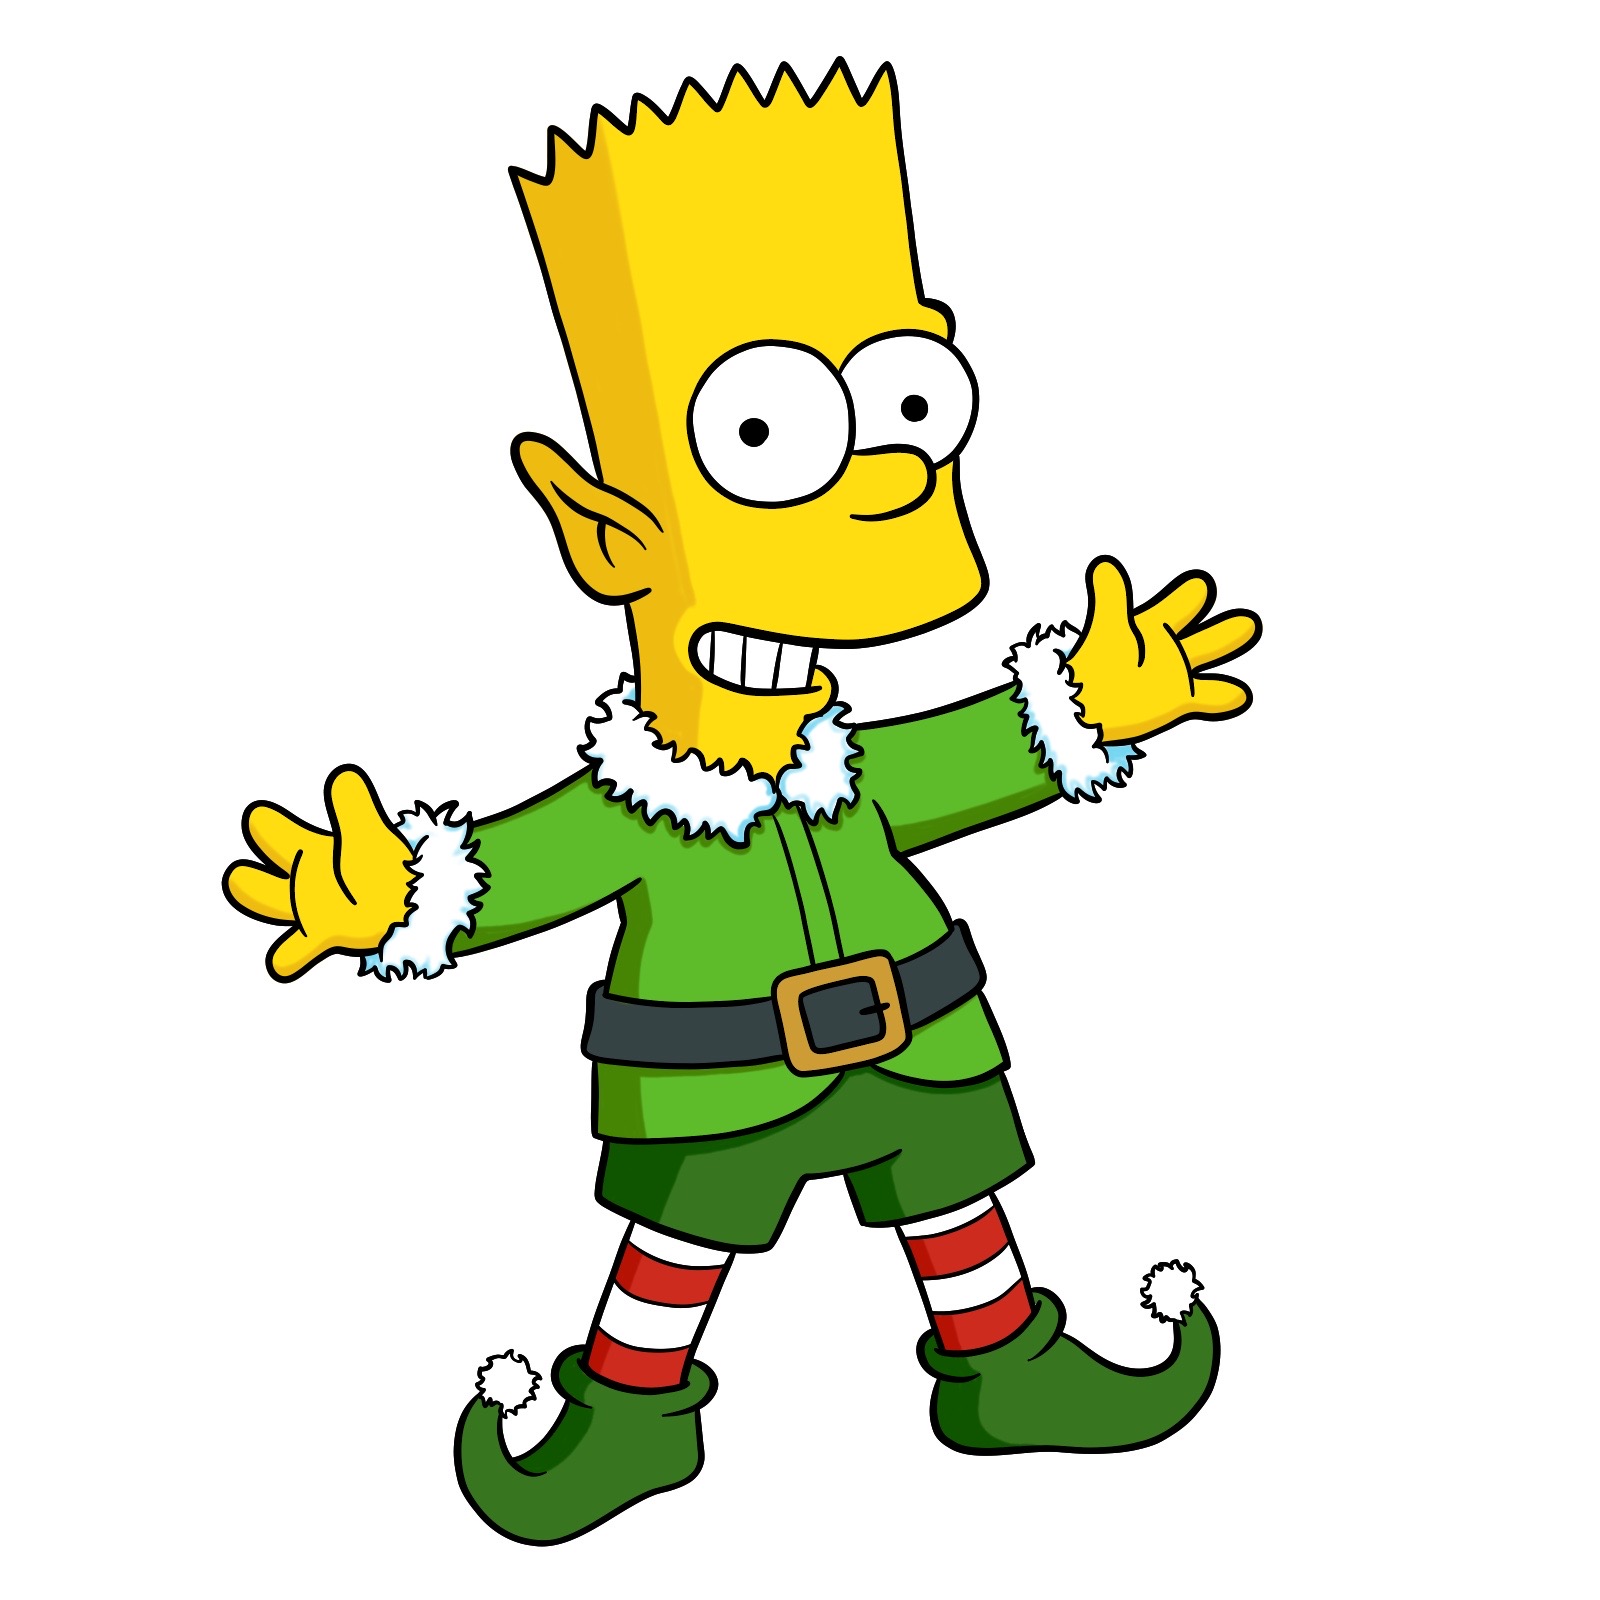 How to draw Bart Simpson as a Christmas Elf - final step